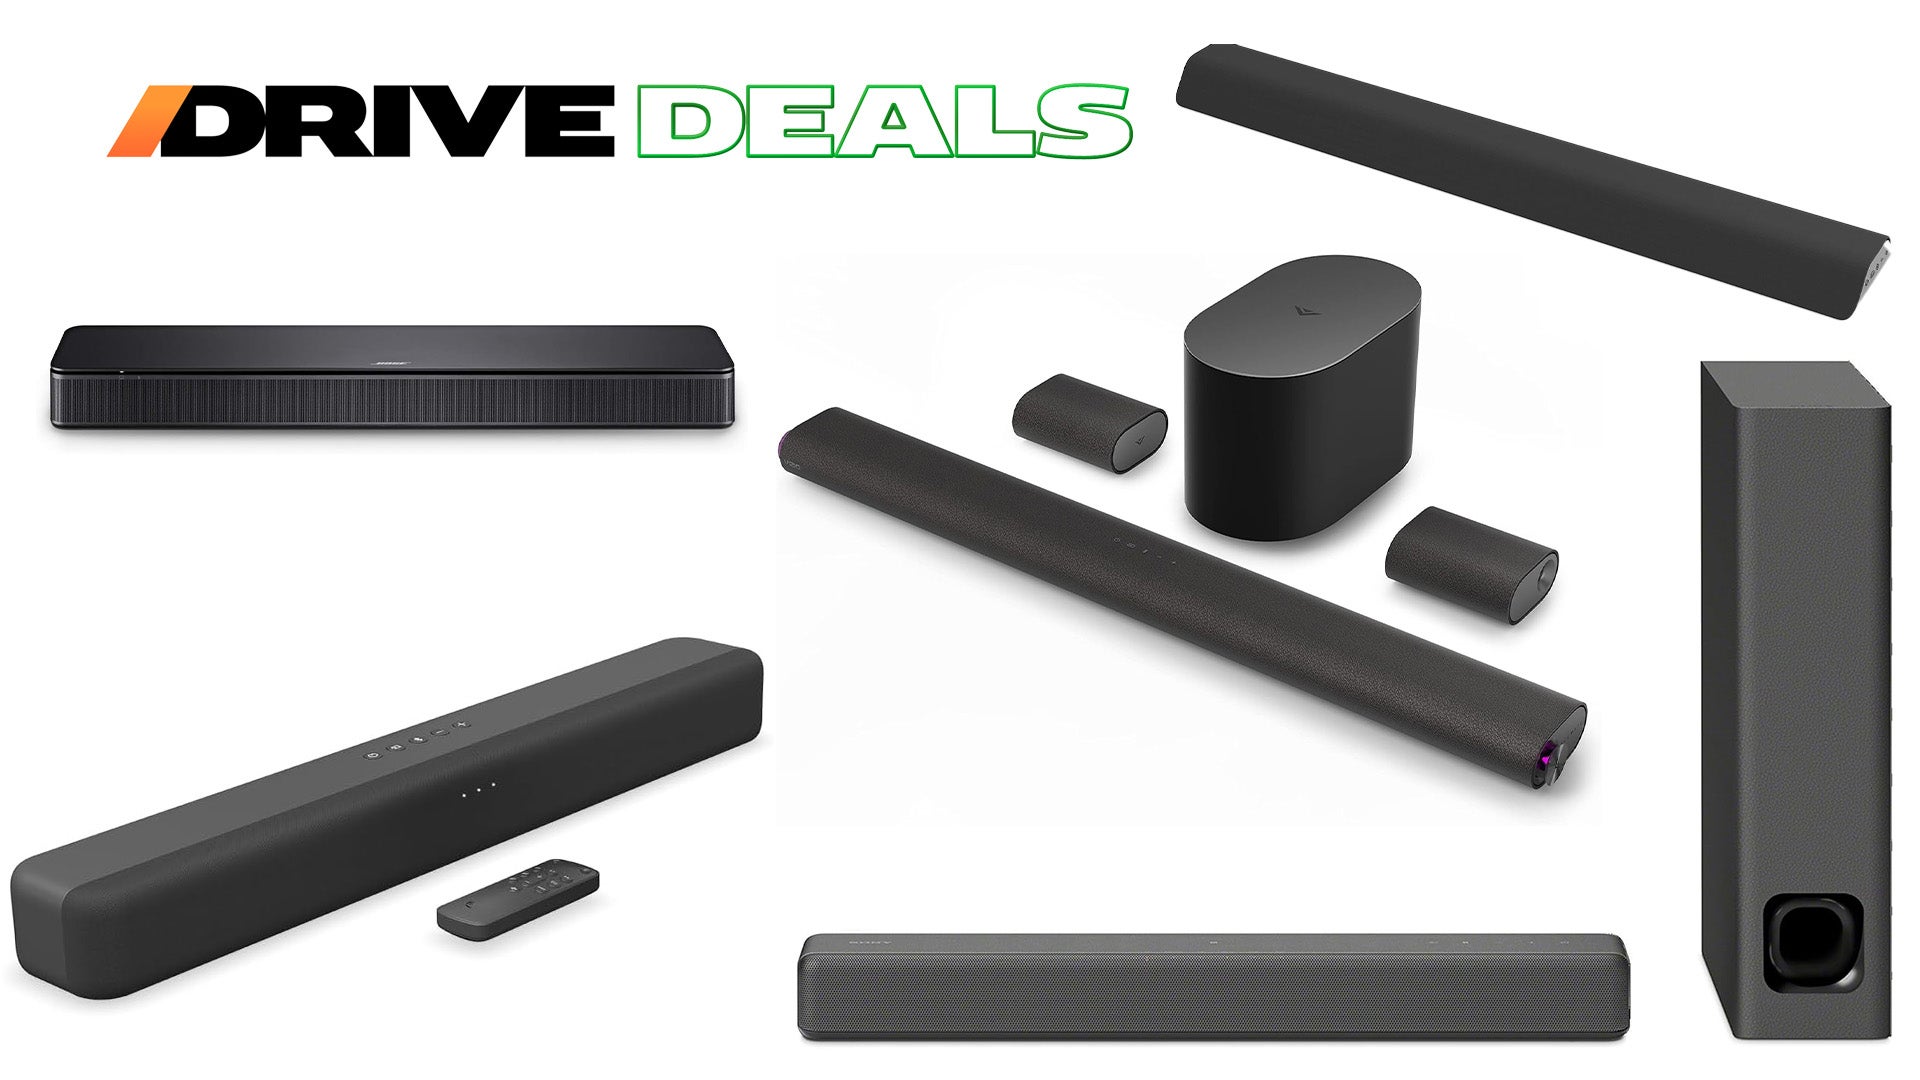 Complete Your Home Theater Experience With These Killer TV and Soundbar ...